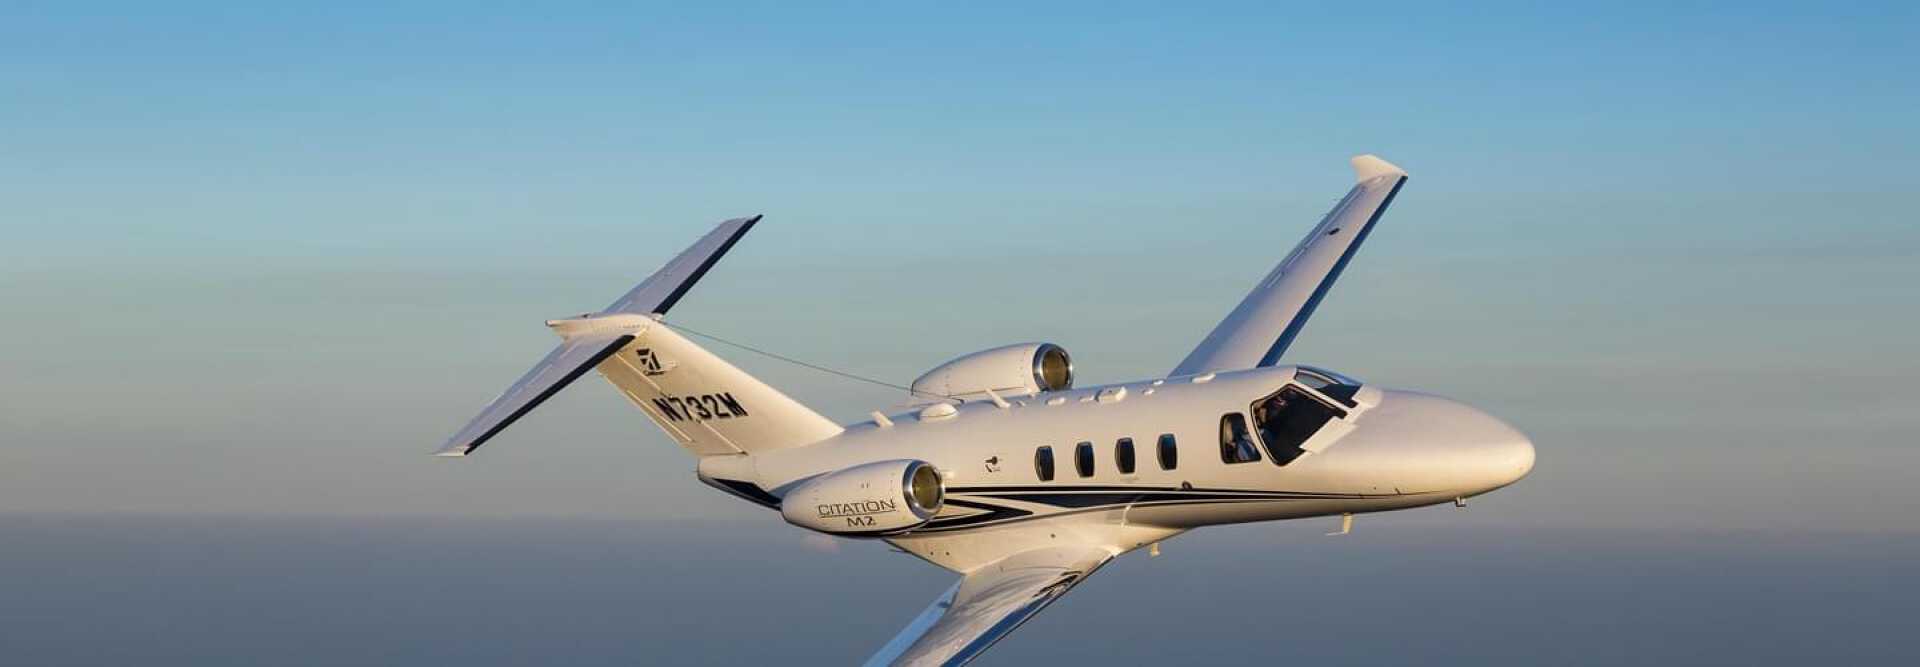 Light Jet Cessna Citation M2 to charter for a private charter flight with LunaJets, short haul flights, comfortable and spacious, intra-european